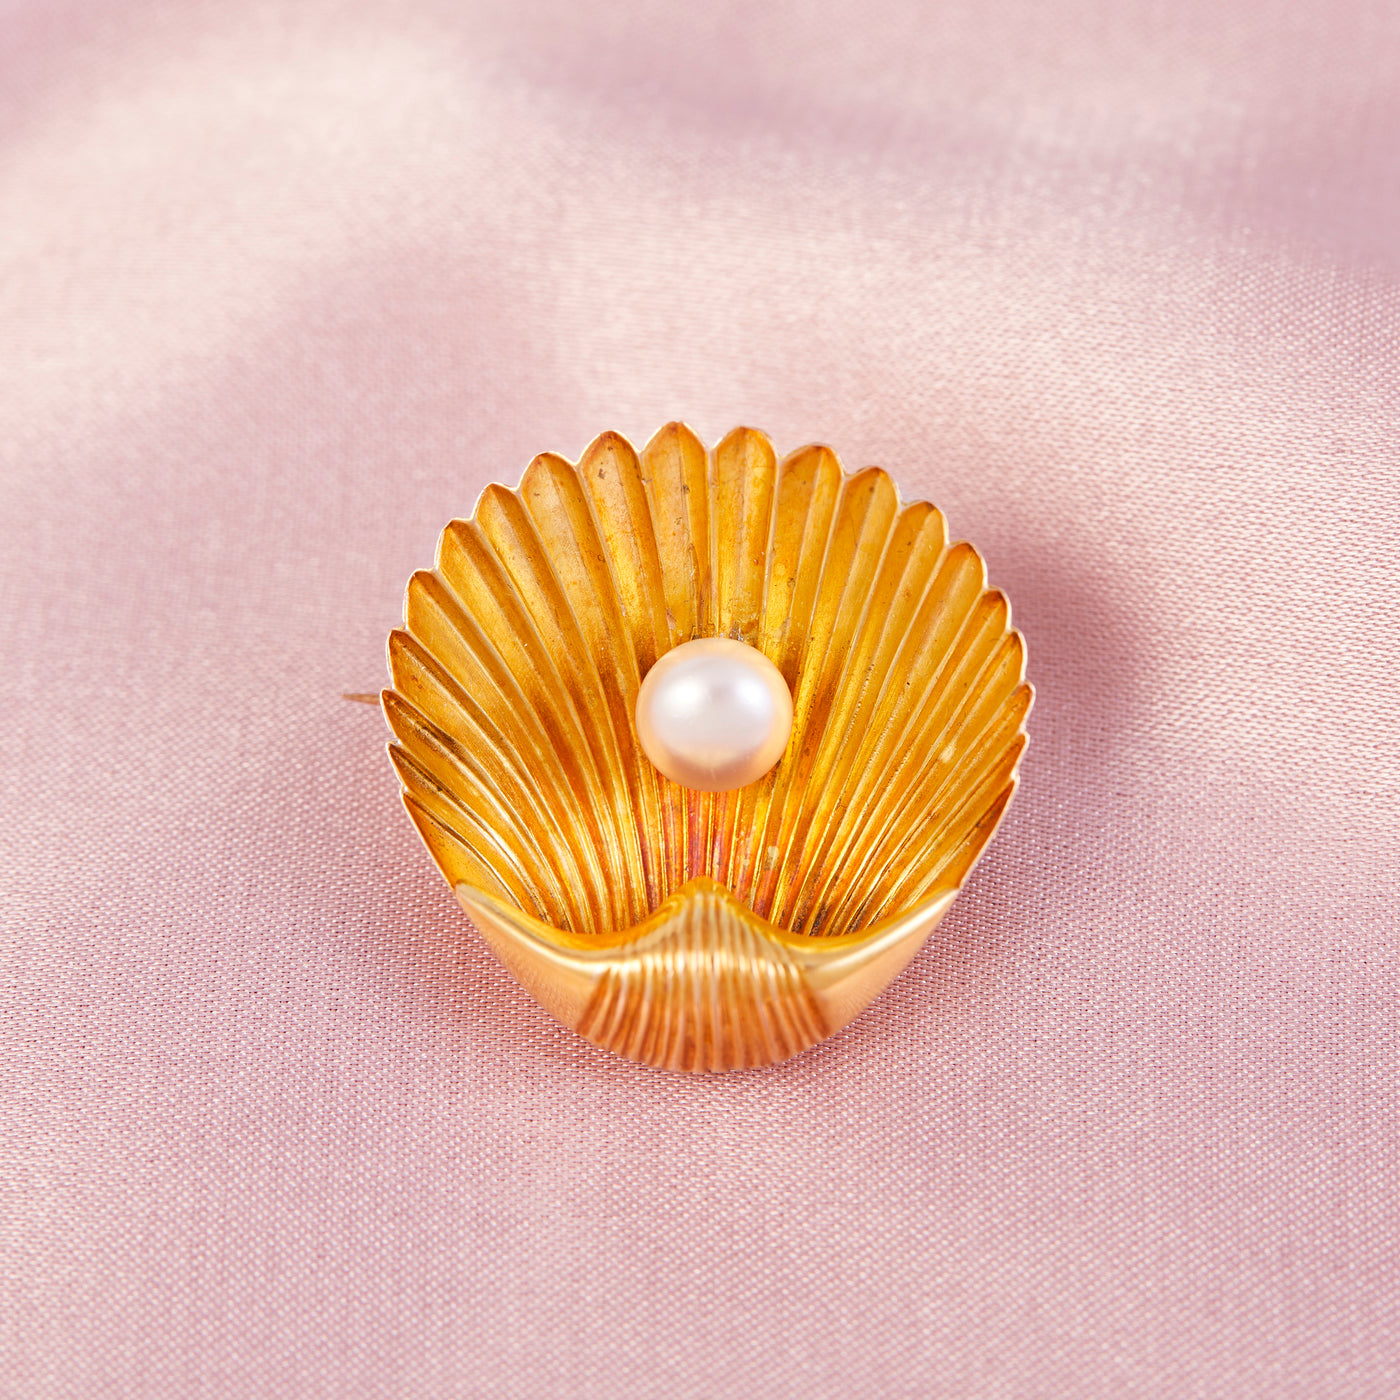 Antique Gold And Natural Pearl Cockle Shell Brooch Frenchjewelbox